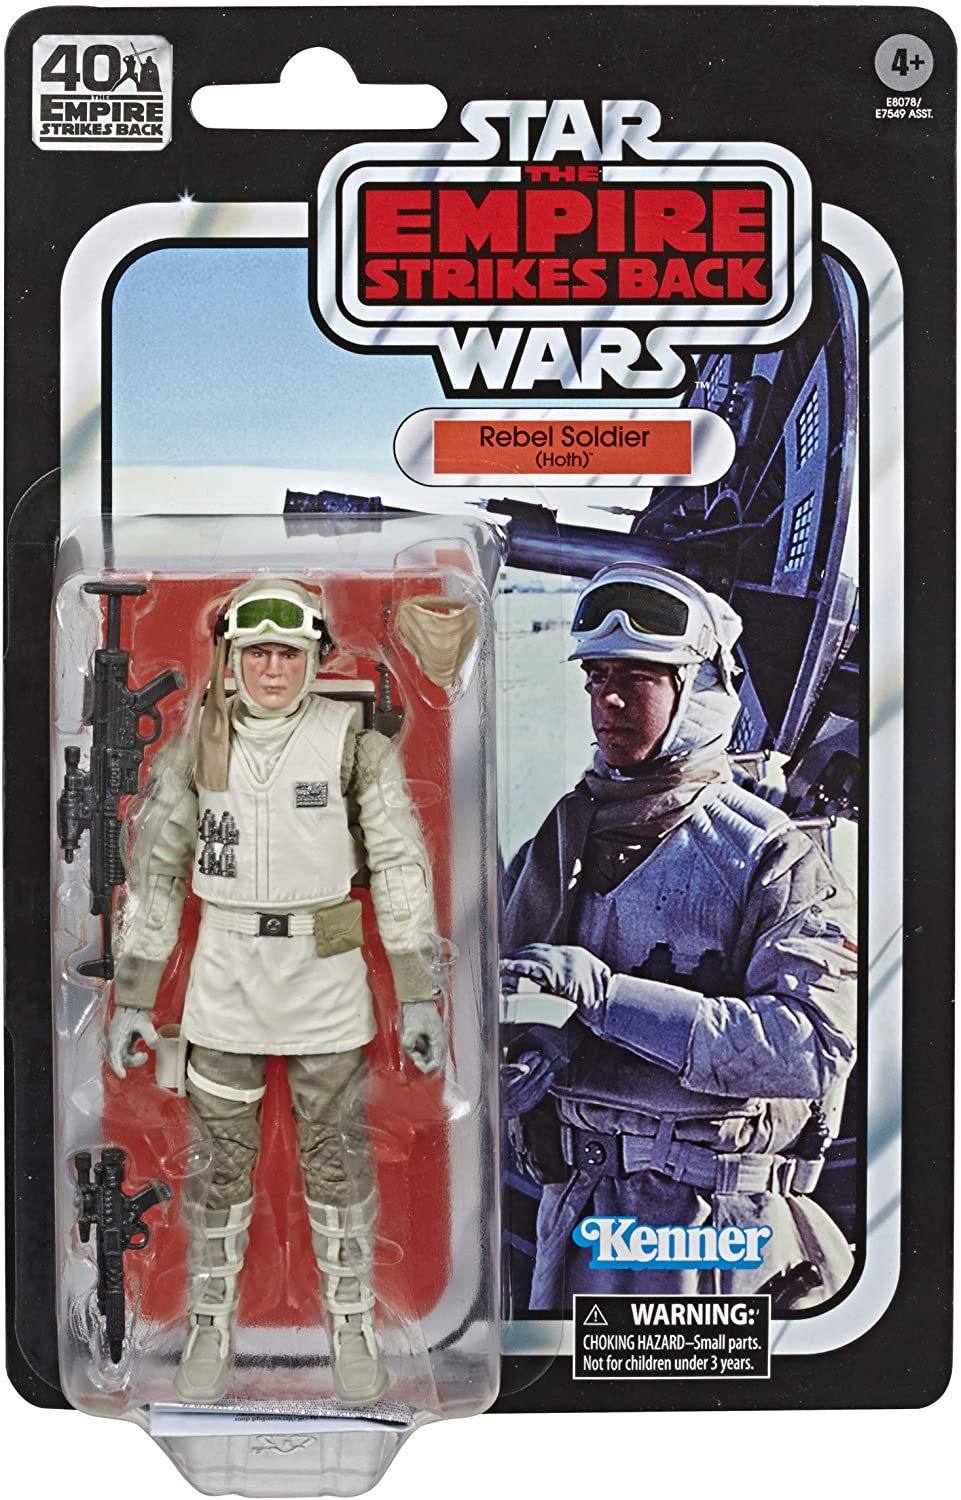 Star Wars The Black Series - The Empire Strikes Back 40TH Anniversary Rebel Soldier (Hoth)